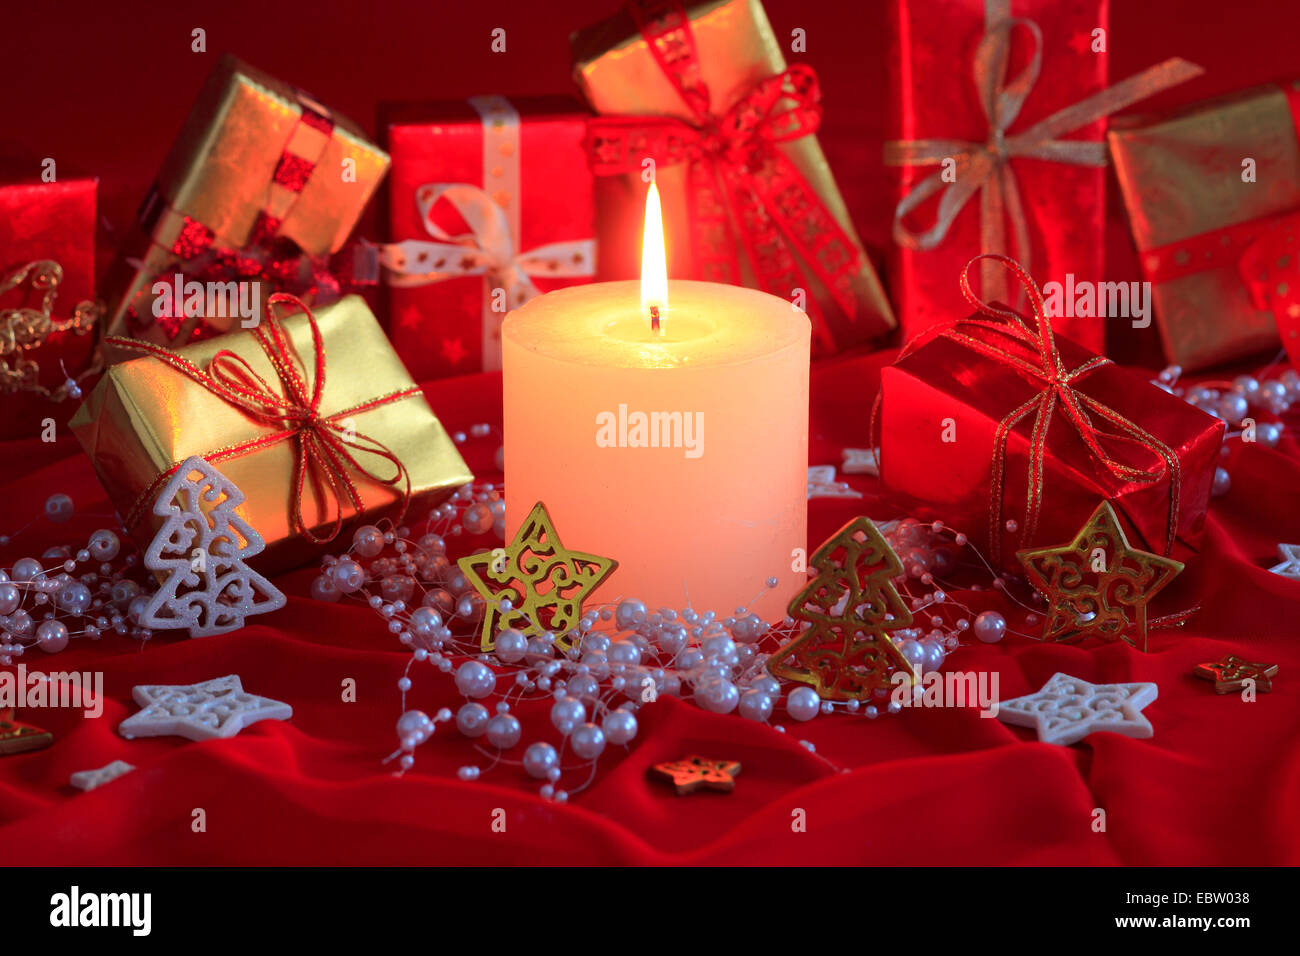 Christmas decoration with presentation packs and candle Stock Photo - Alamy